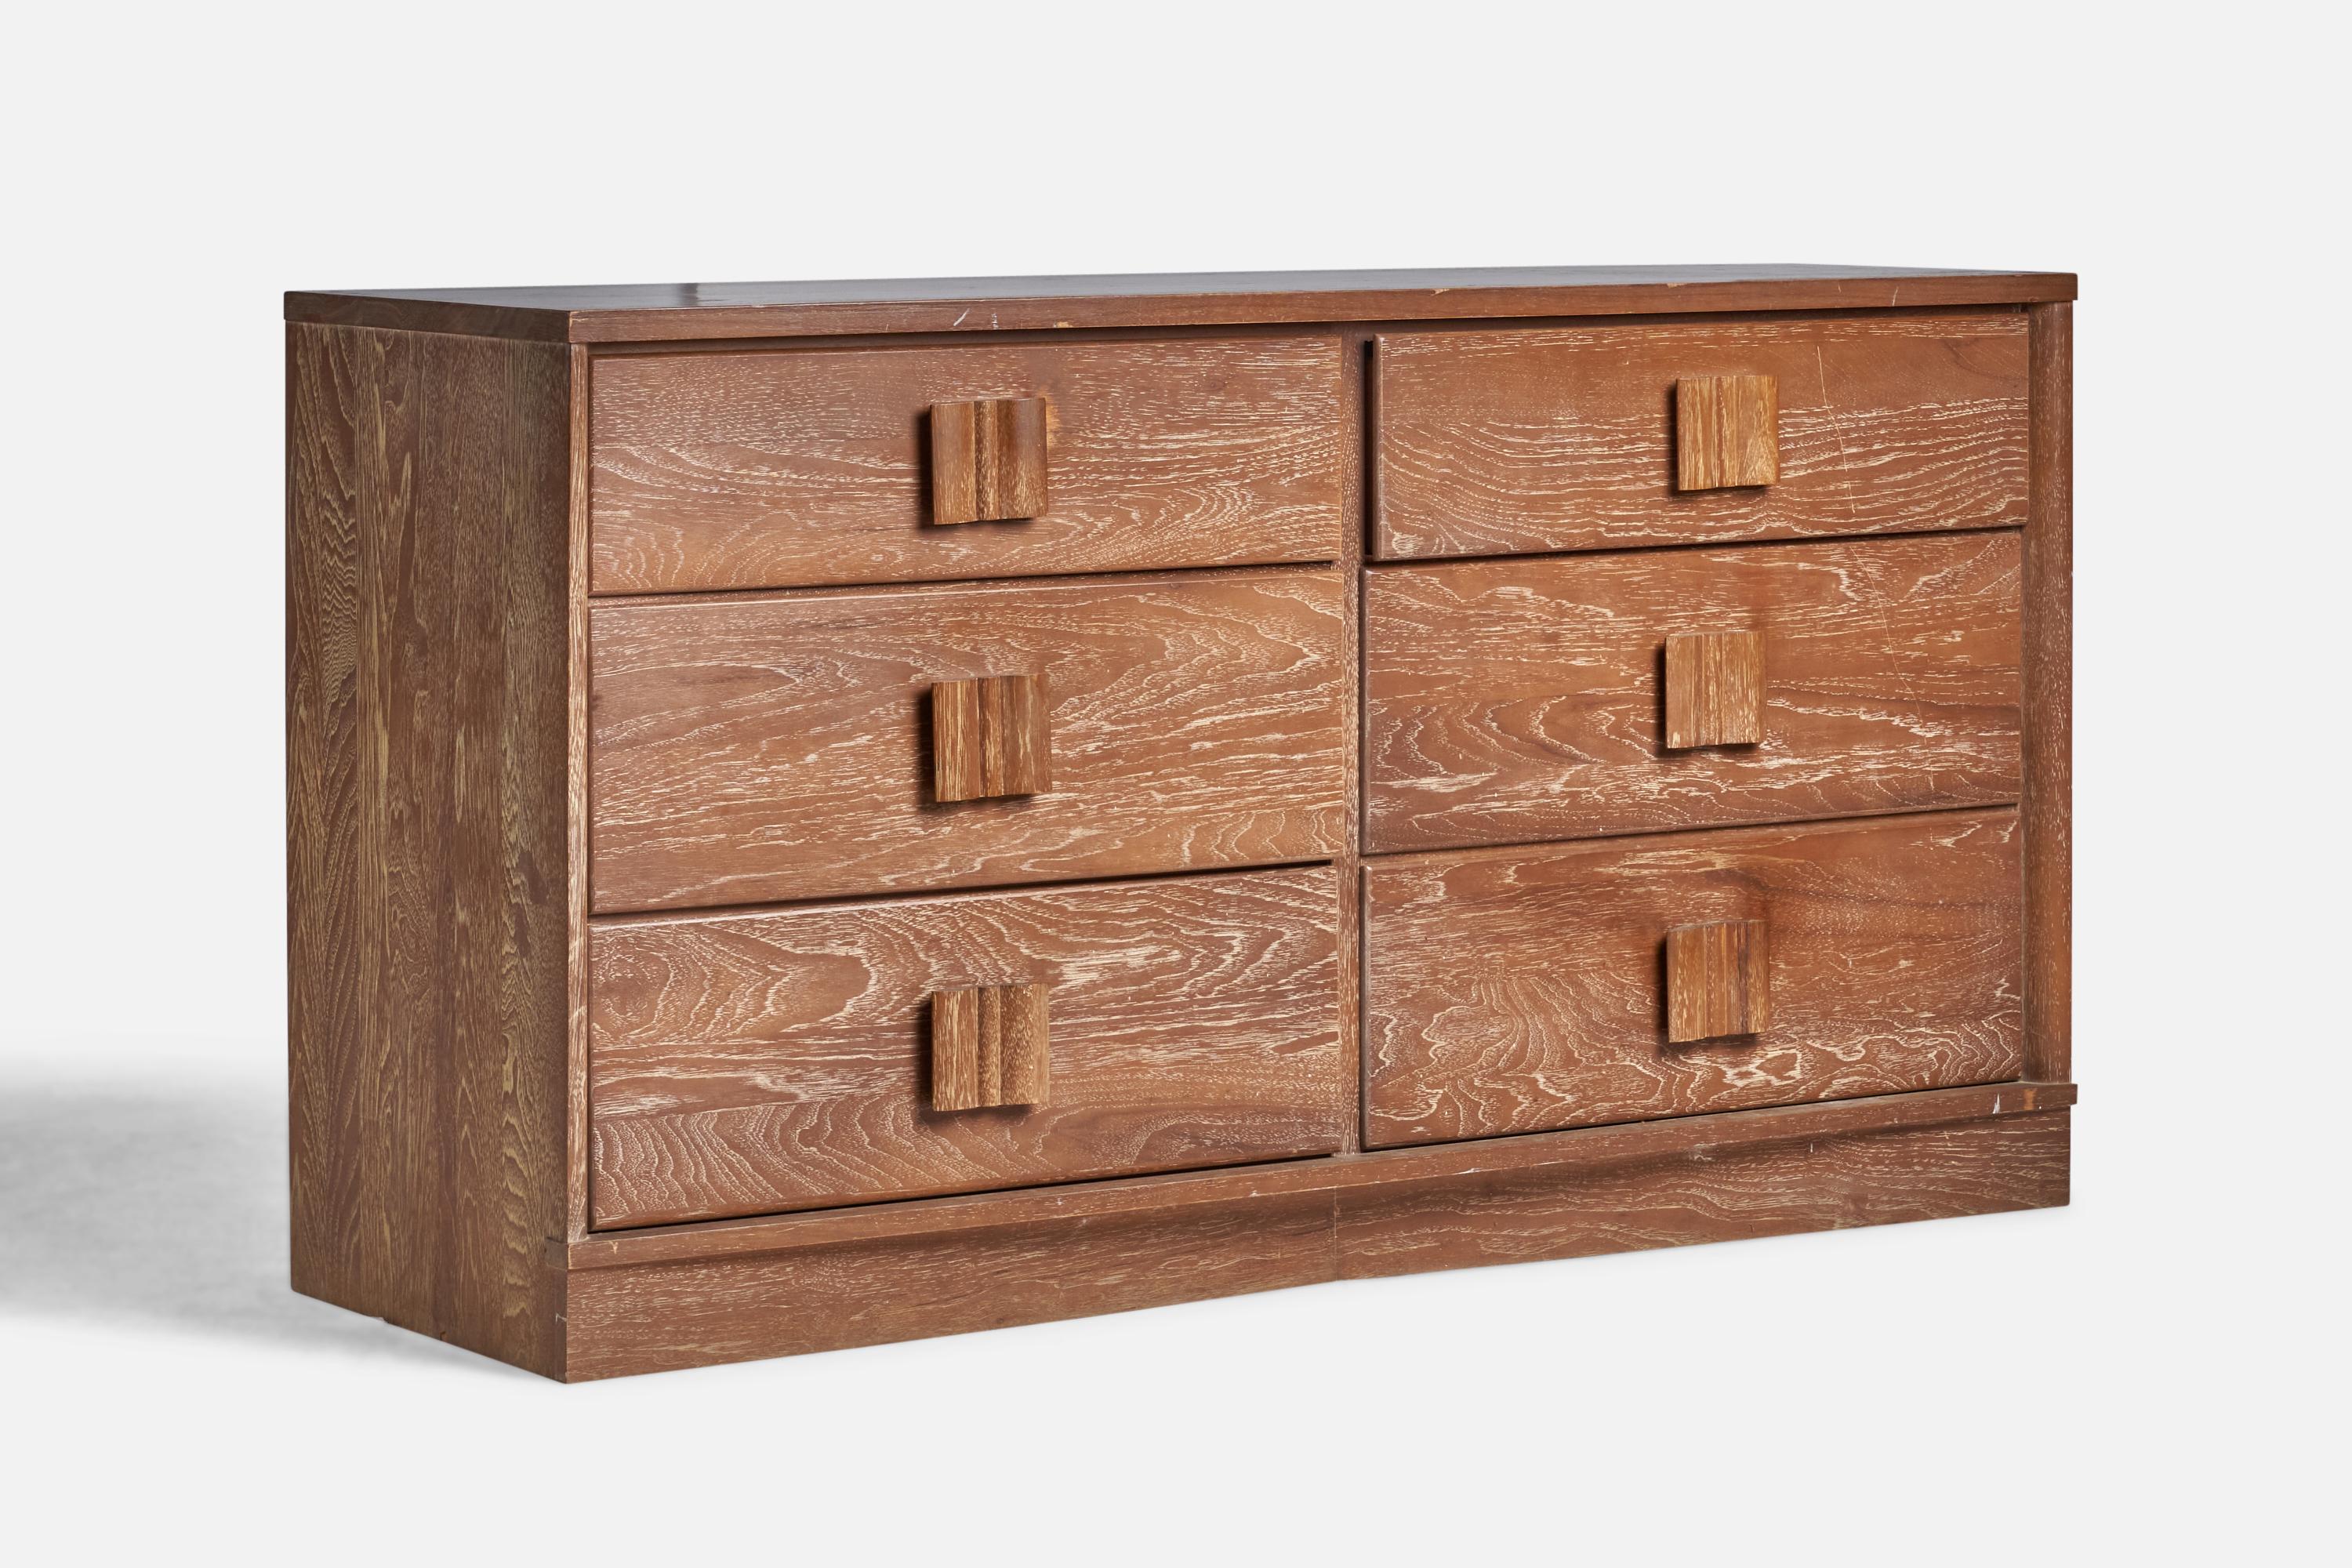 A cerused oak dresser designed and produced in the US, 1940s.